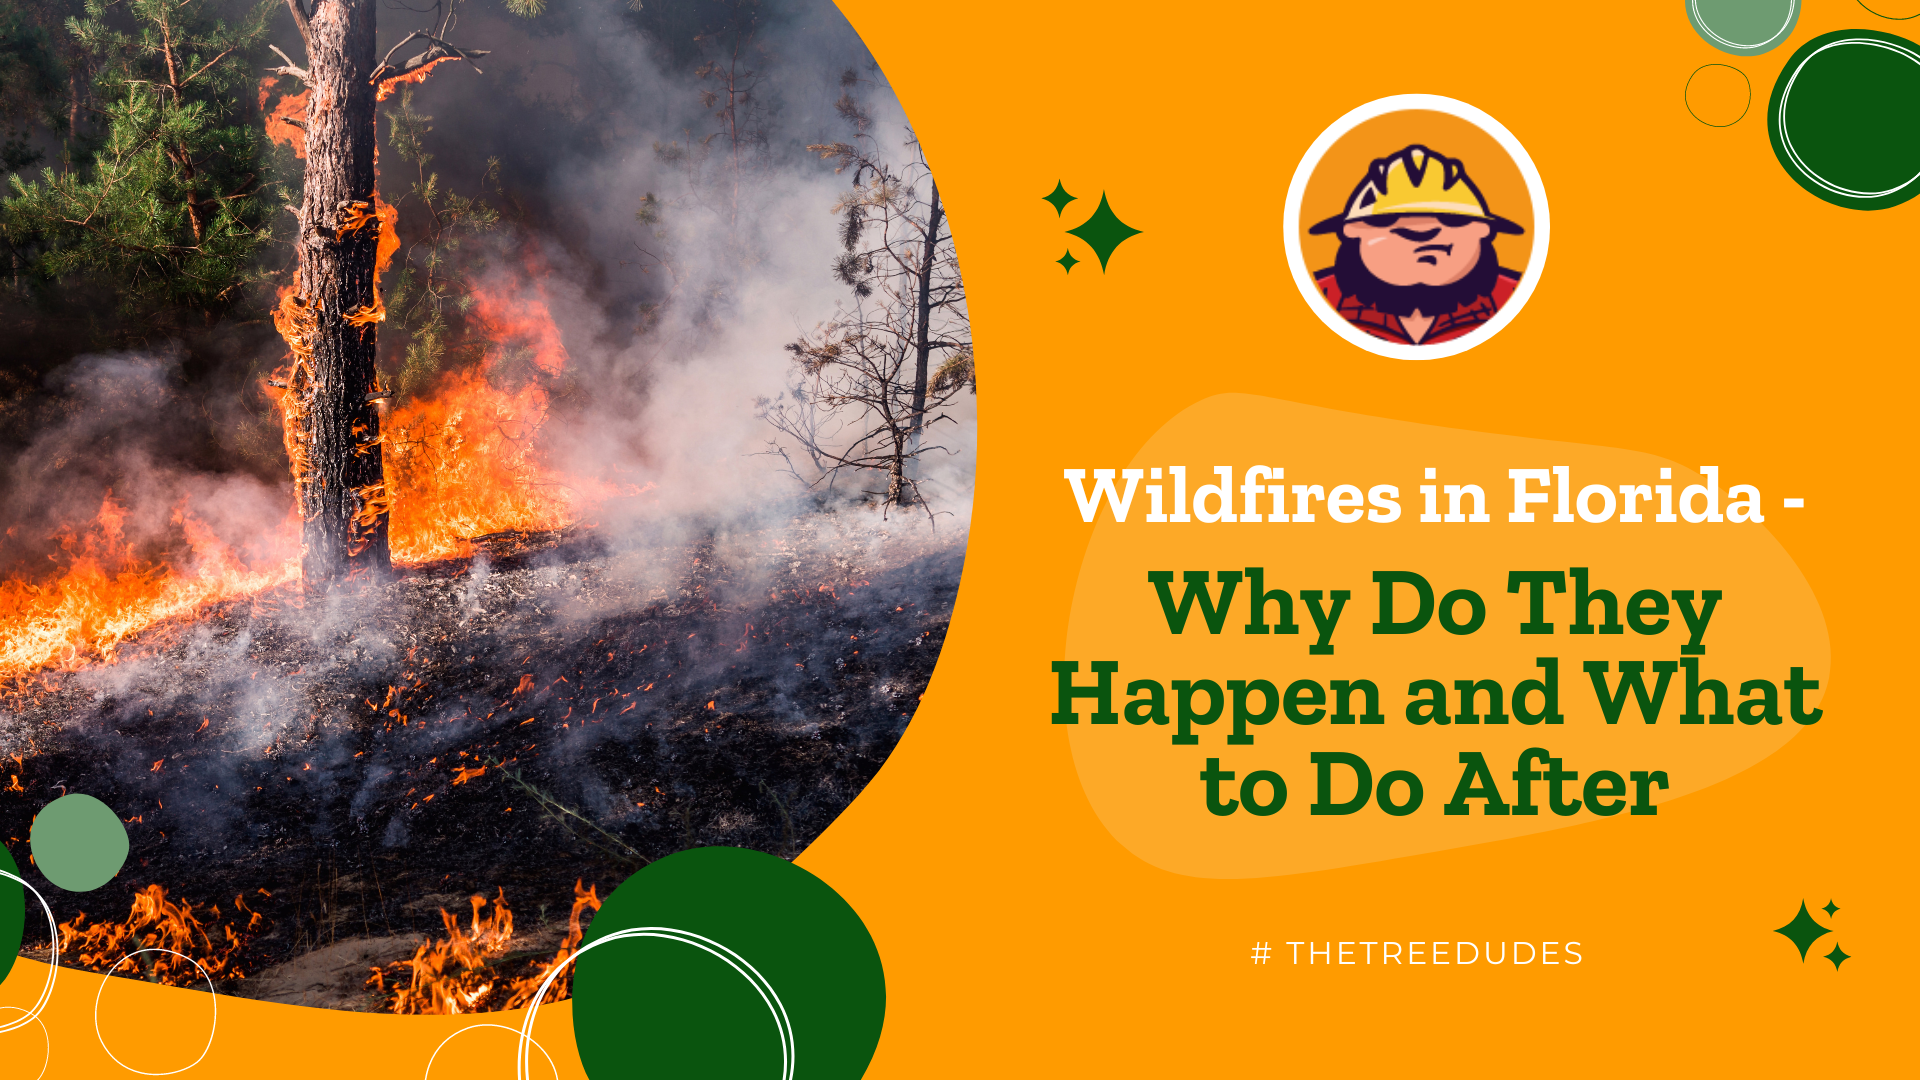 Wildfires in Florida - Why Do They Happen and What to Do After